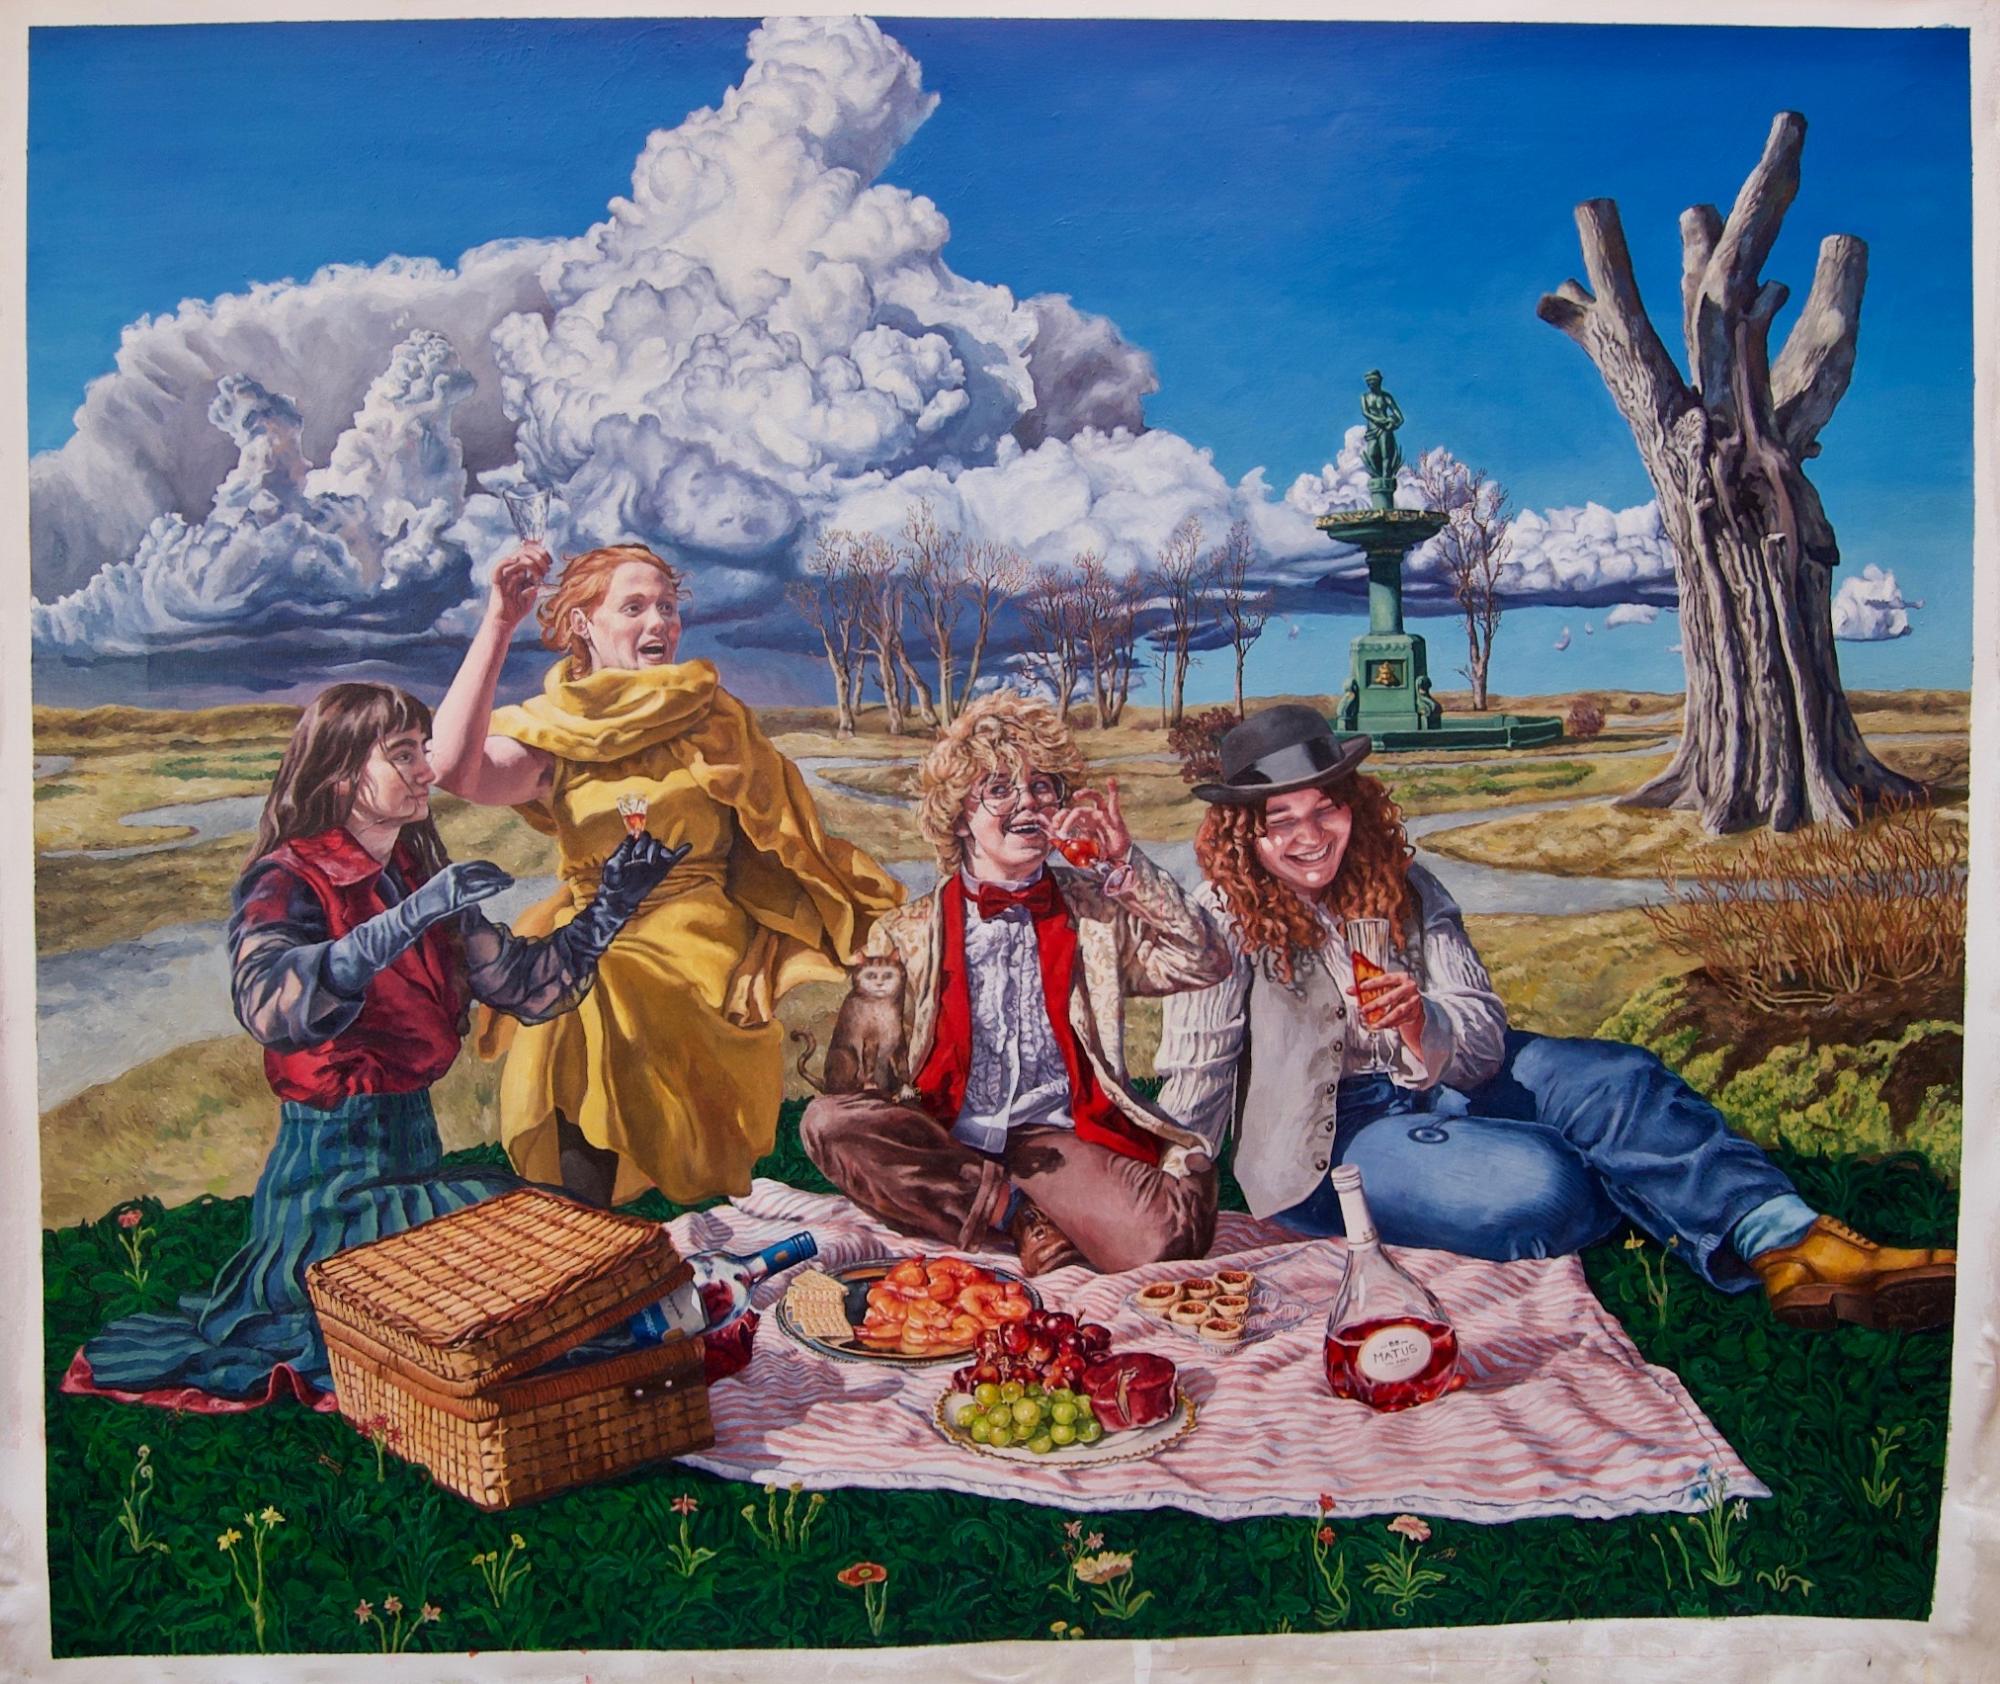 4 Friends are sitting in a surreal landscape having a picnic, eating and lauging